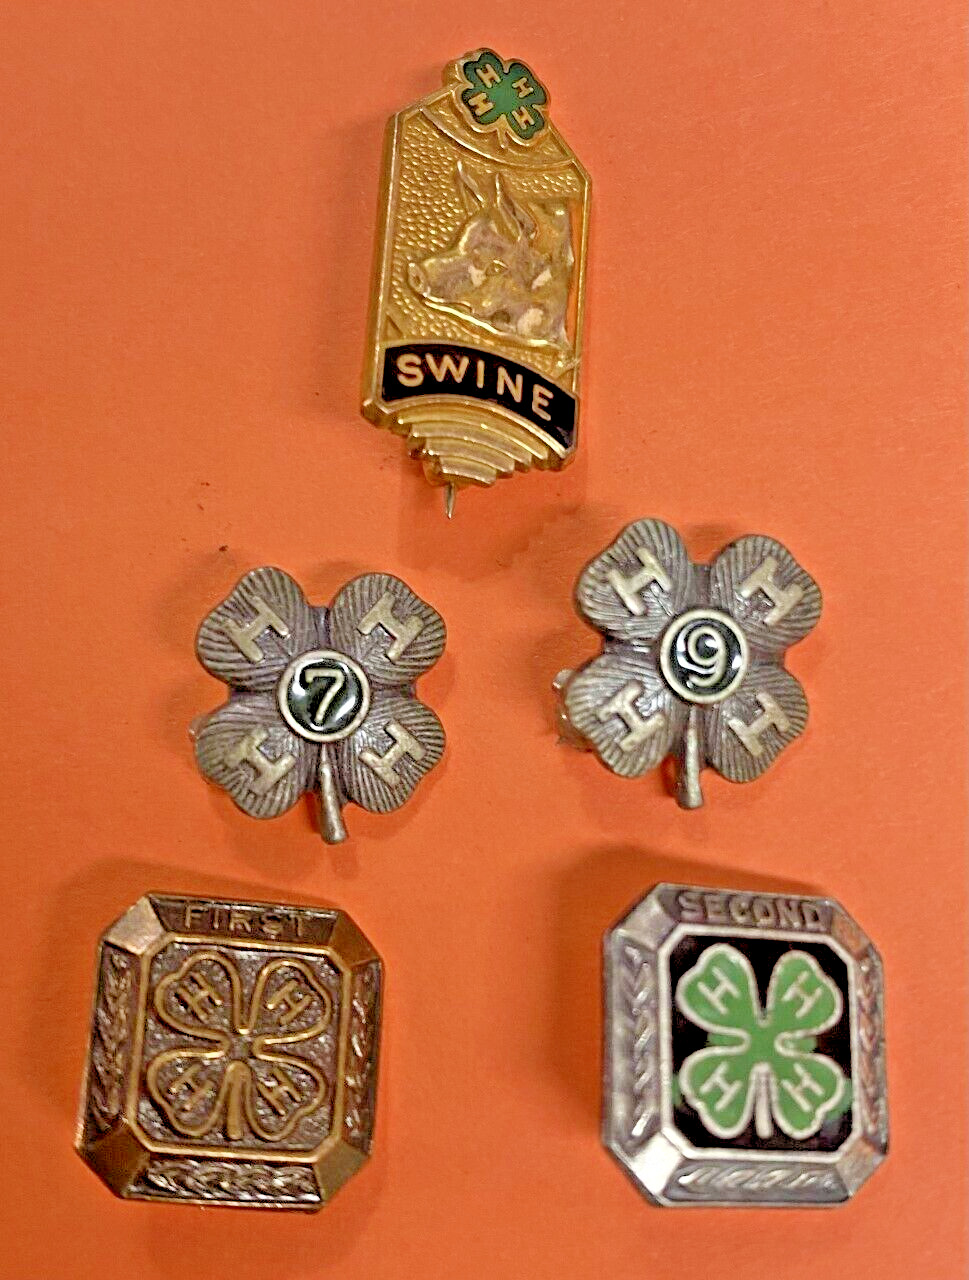 5 Vintage 4-H Pins, COUNTY HONOR SWINE Award, Gold Filled, Sterling, etc SEE PIC